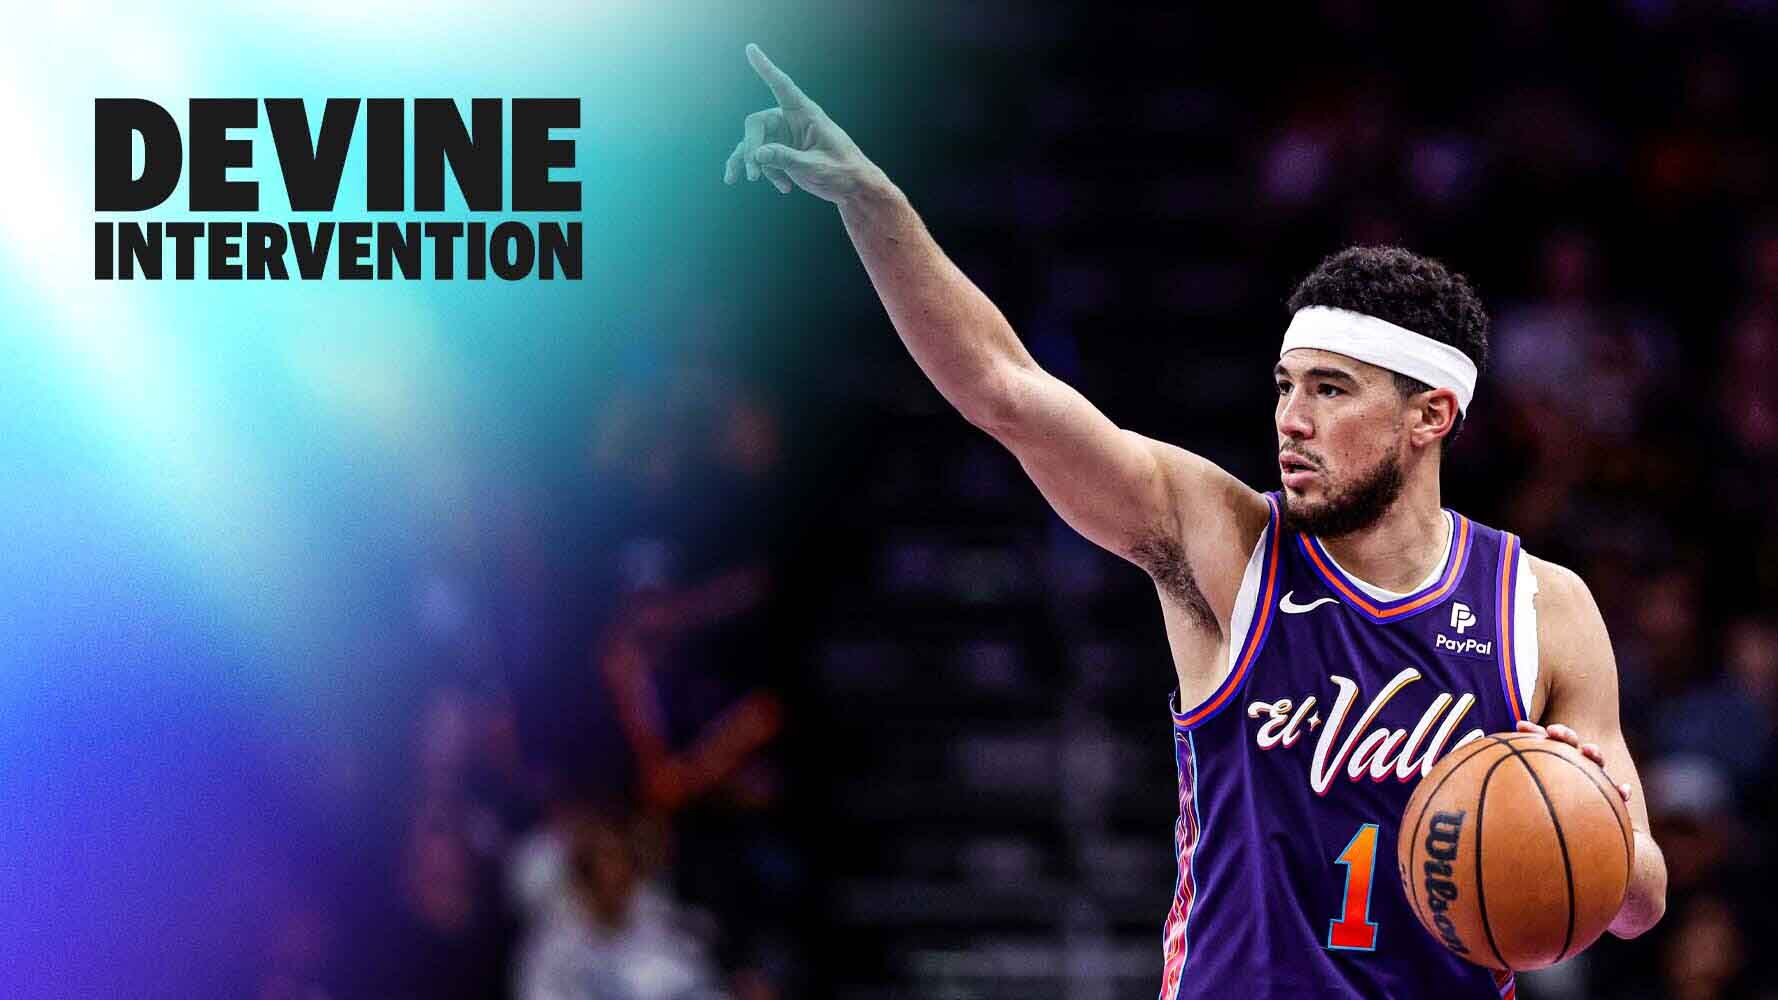 Could Devin Booker be the best point guard in the NBA? | Devine Intervention